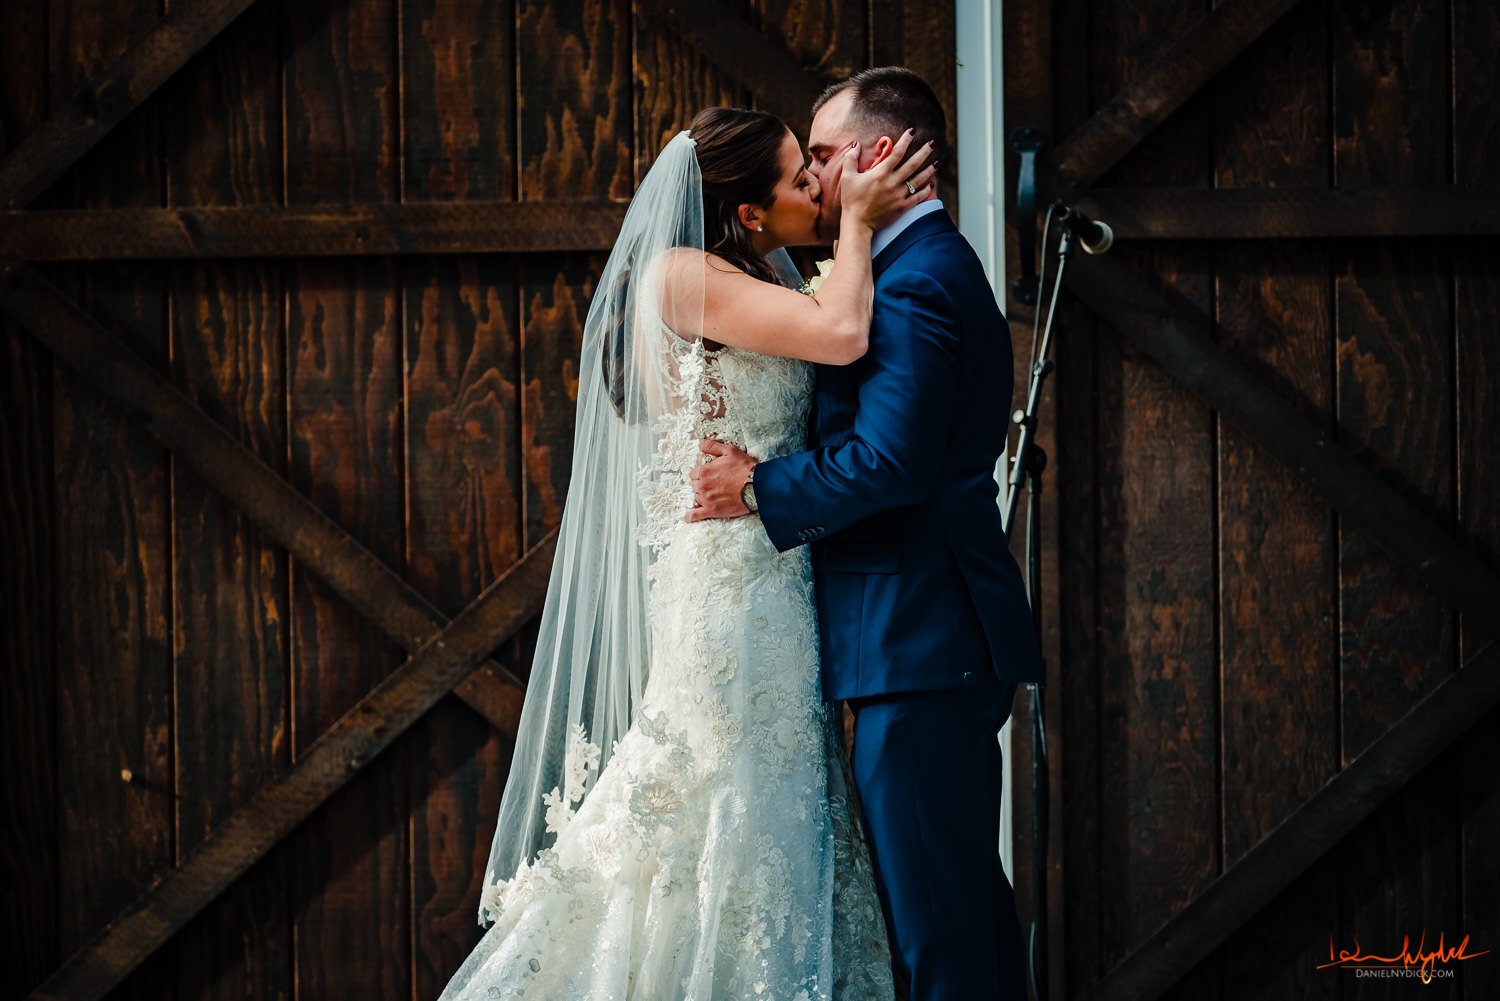 first kiss as husband and wife at nj barn wedding